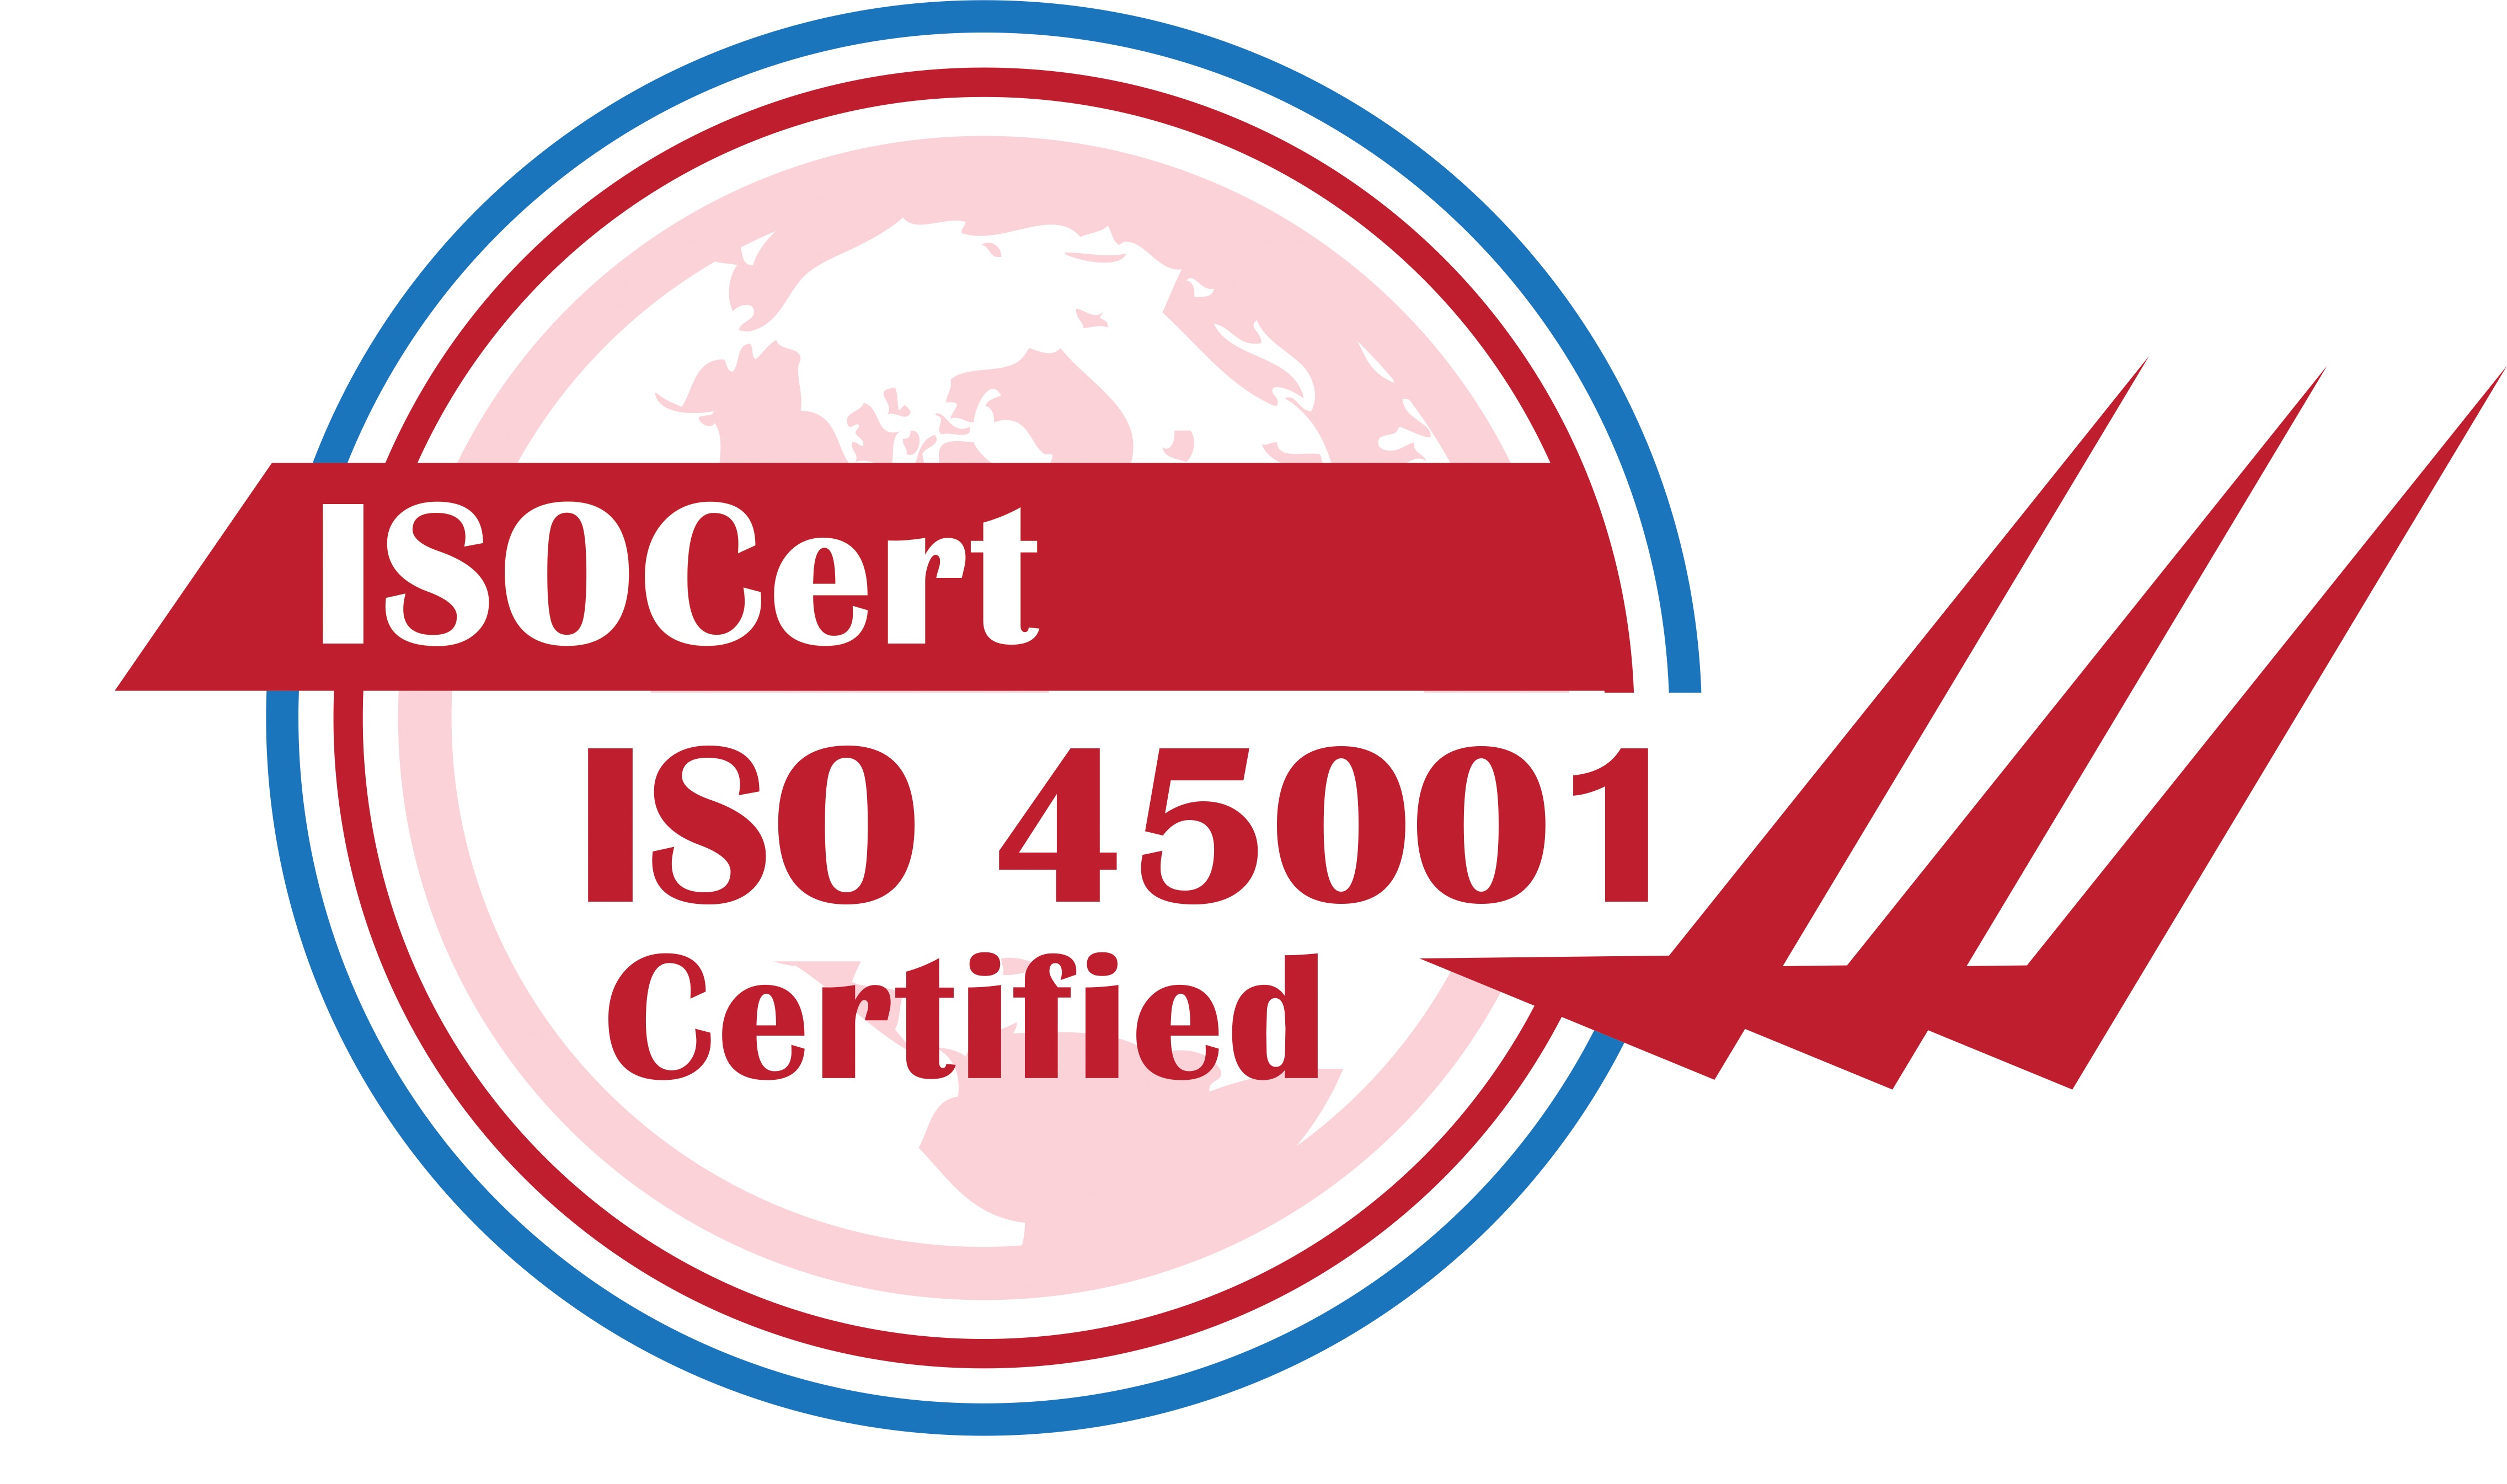 ISOcert_system logos-ISO 45000 - Copy